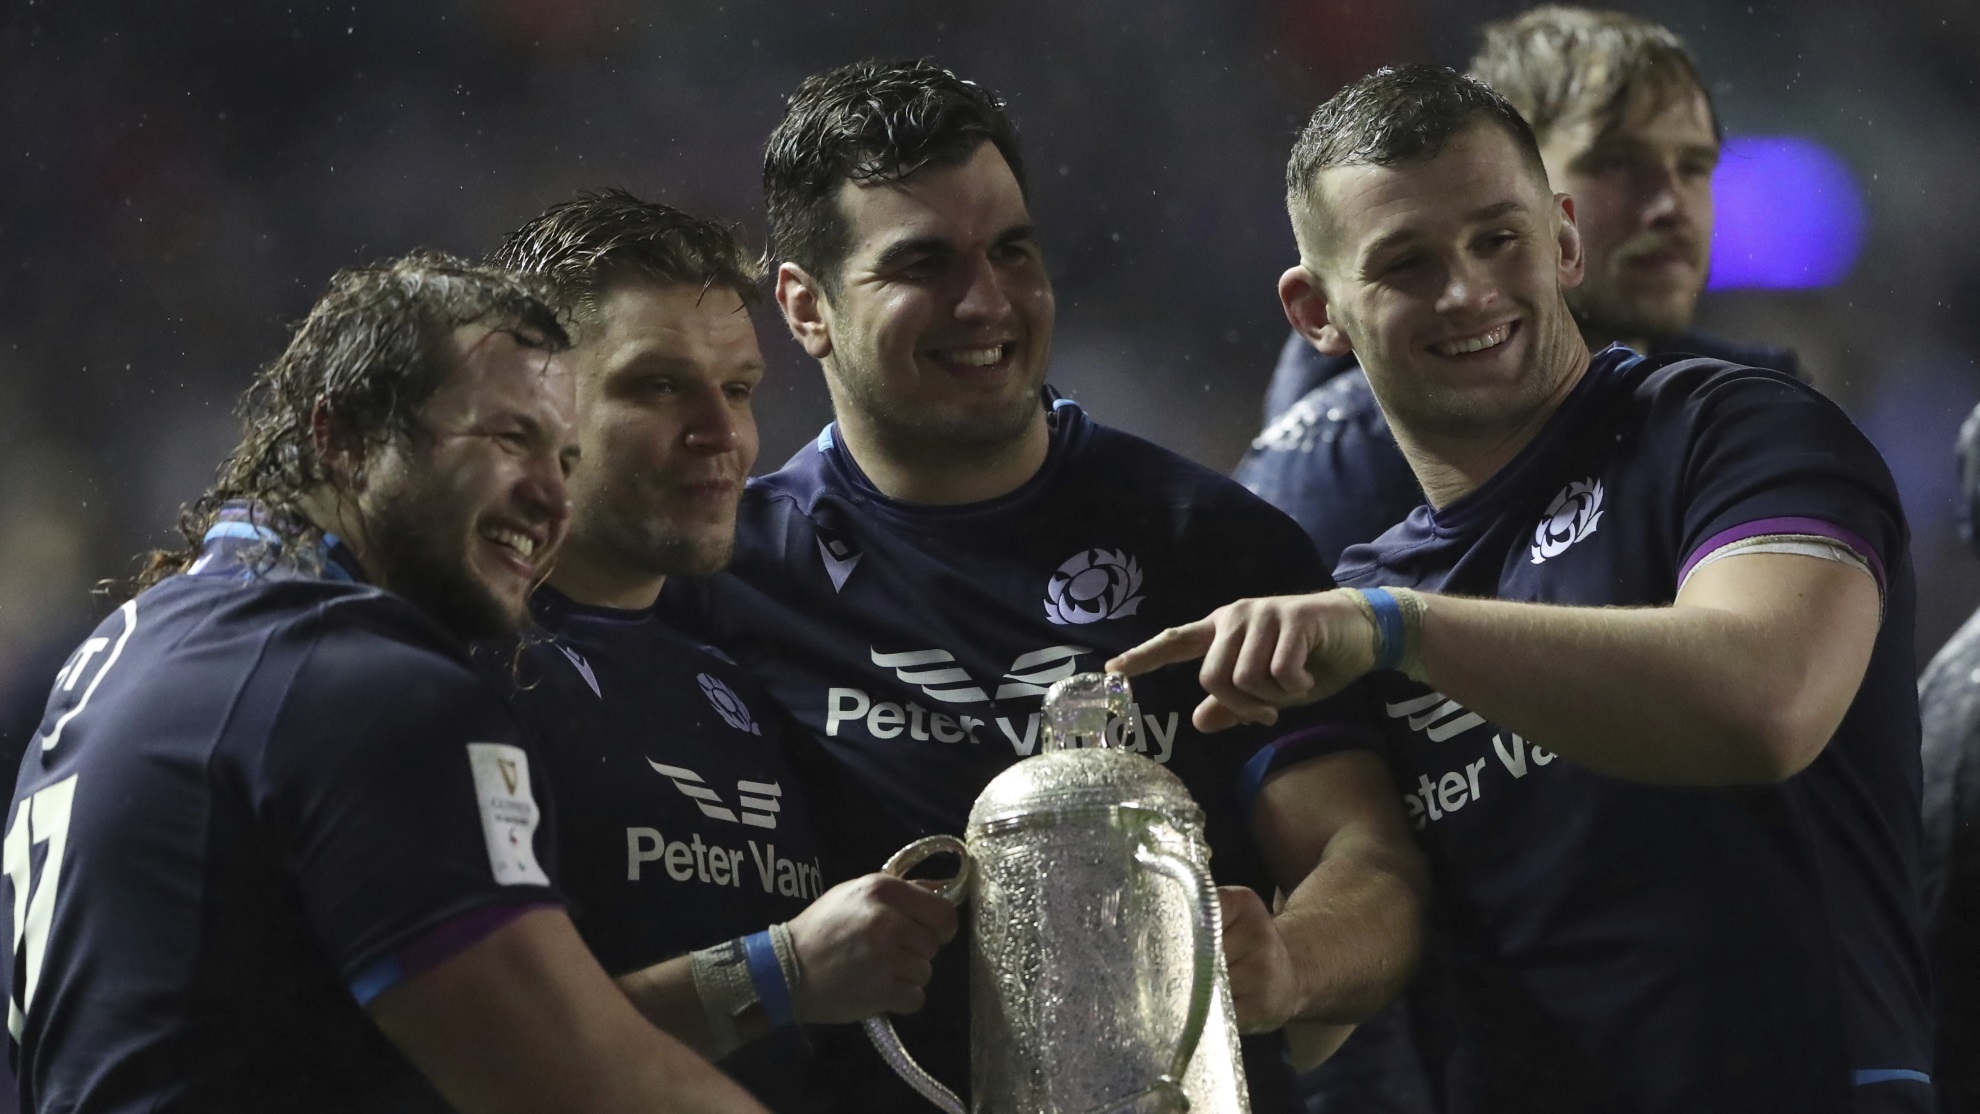 Members of the Scottish team pose with the Calcutta Cup after defeating England.